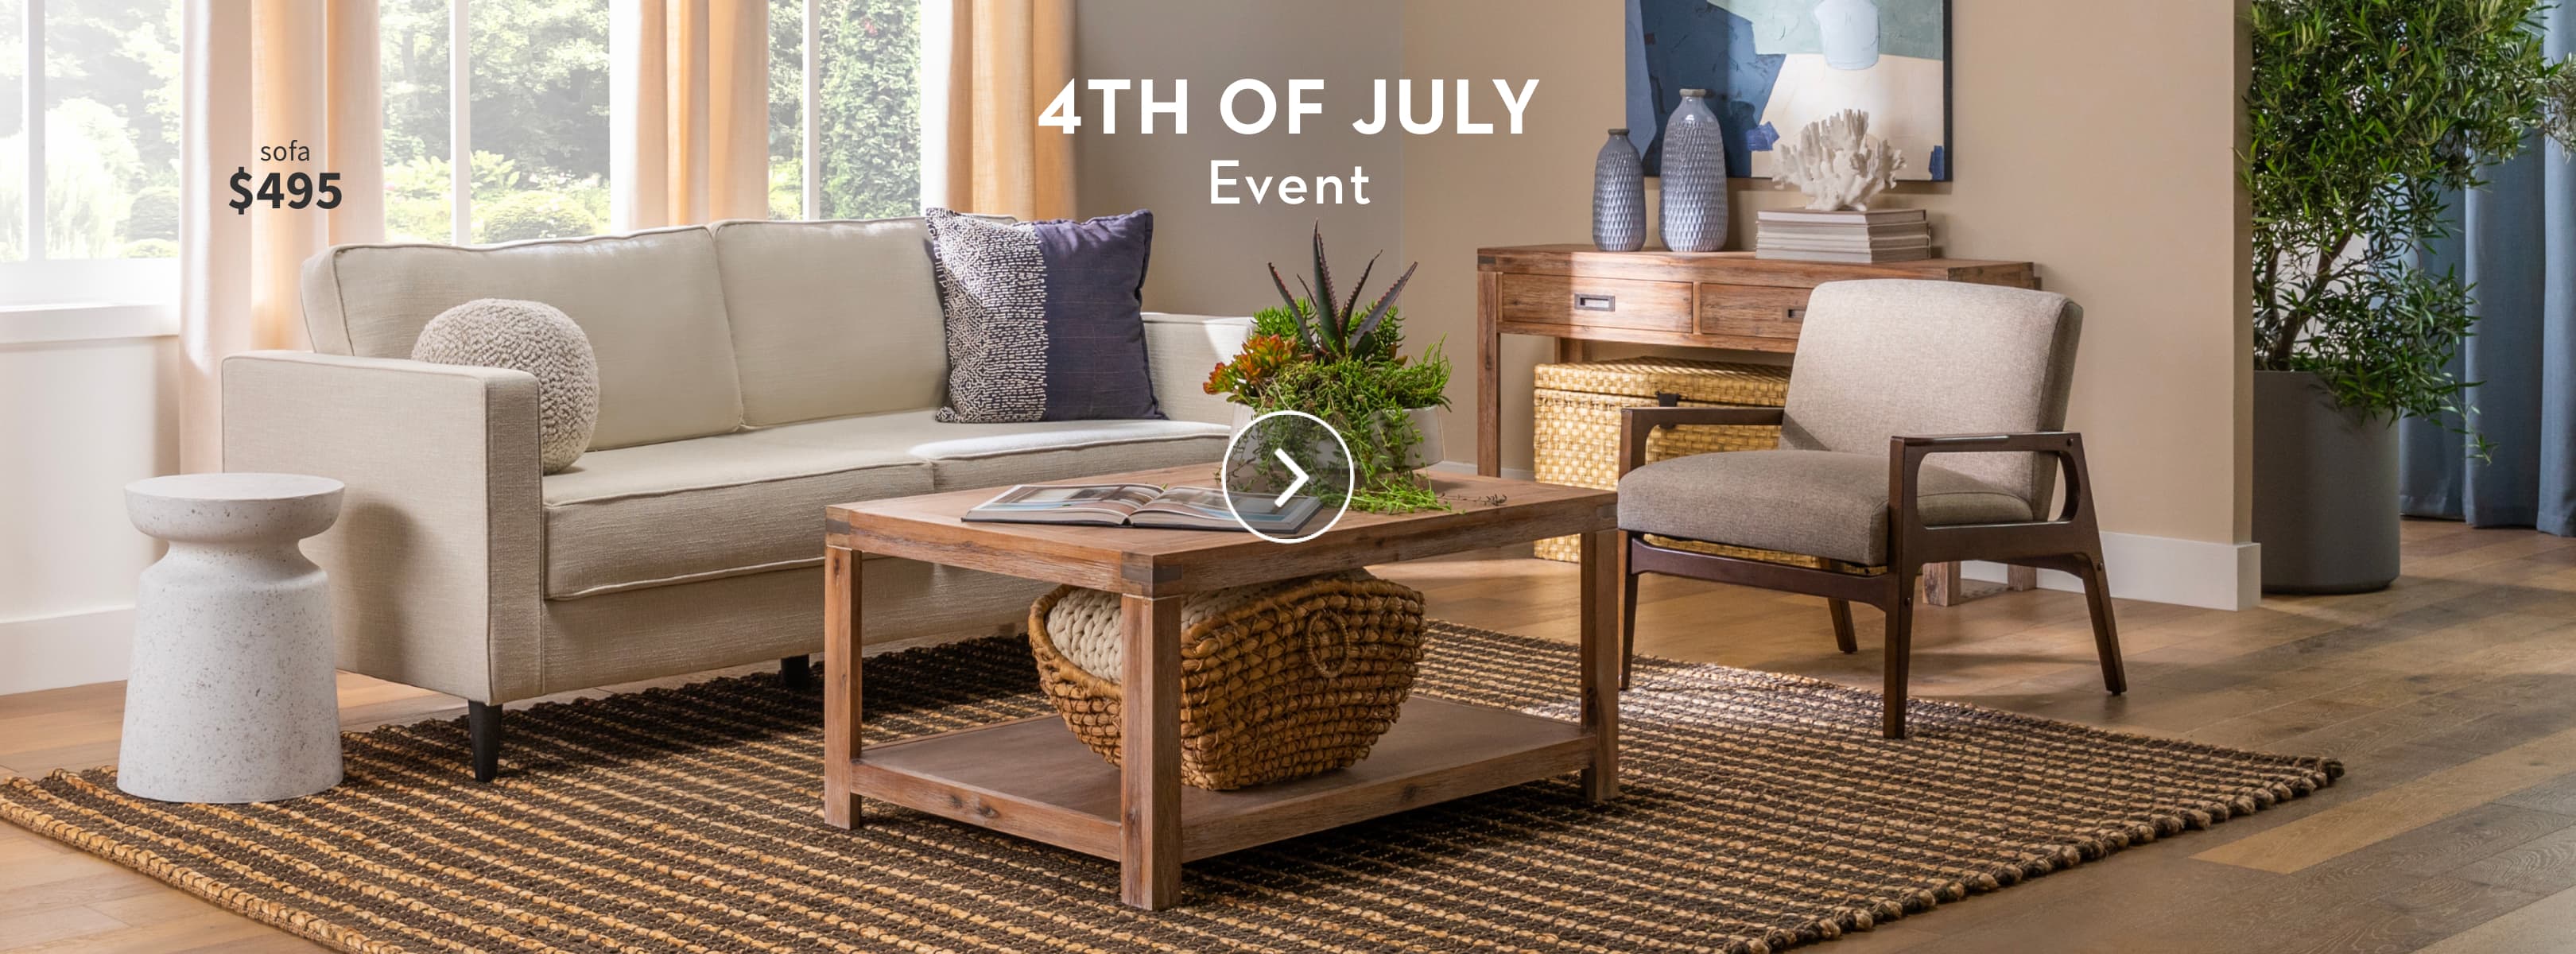 4th of July Event. sofa $495.
